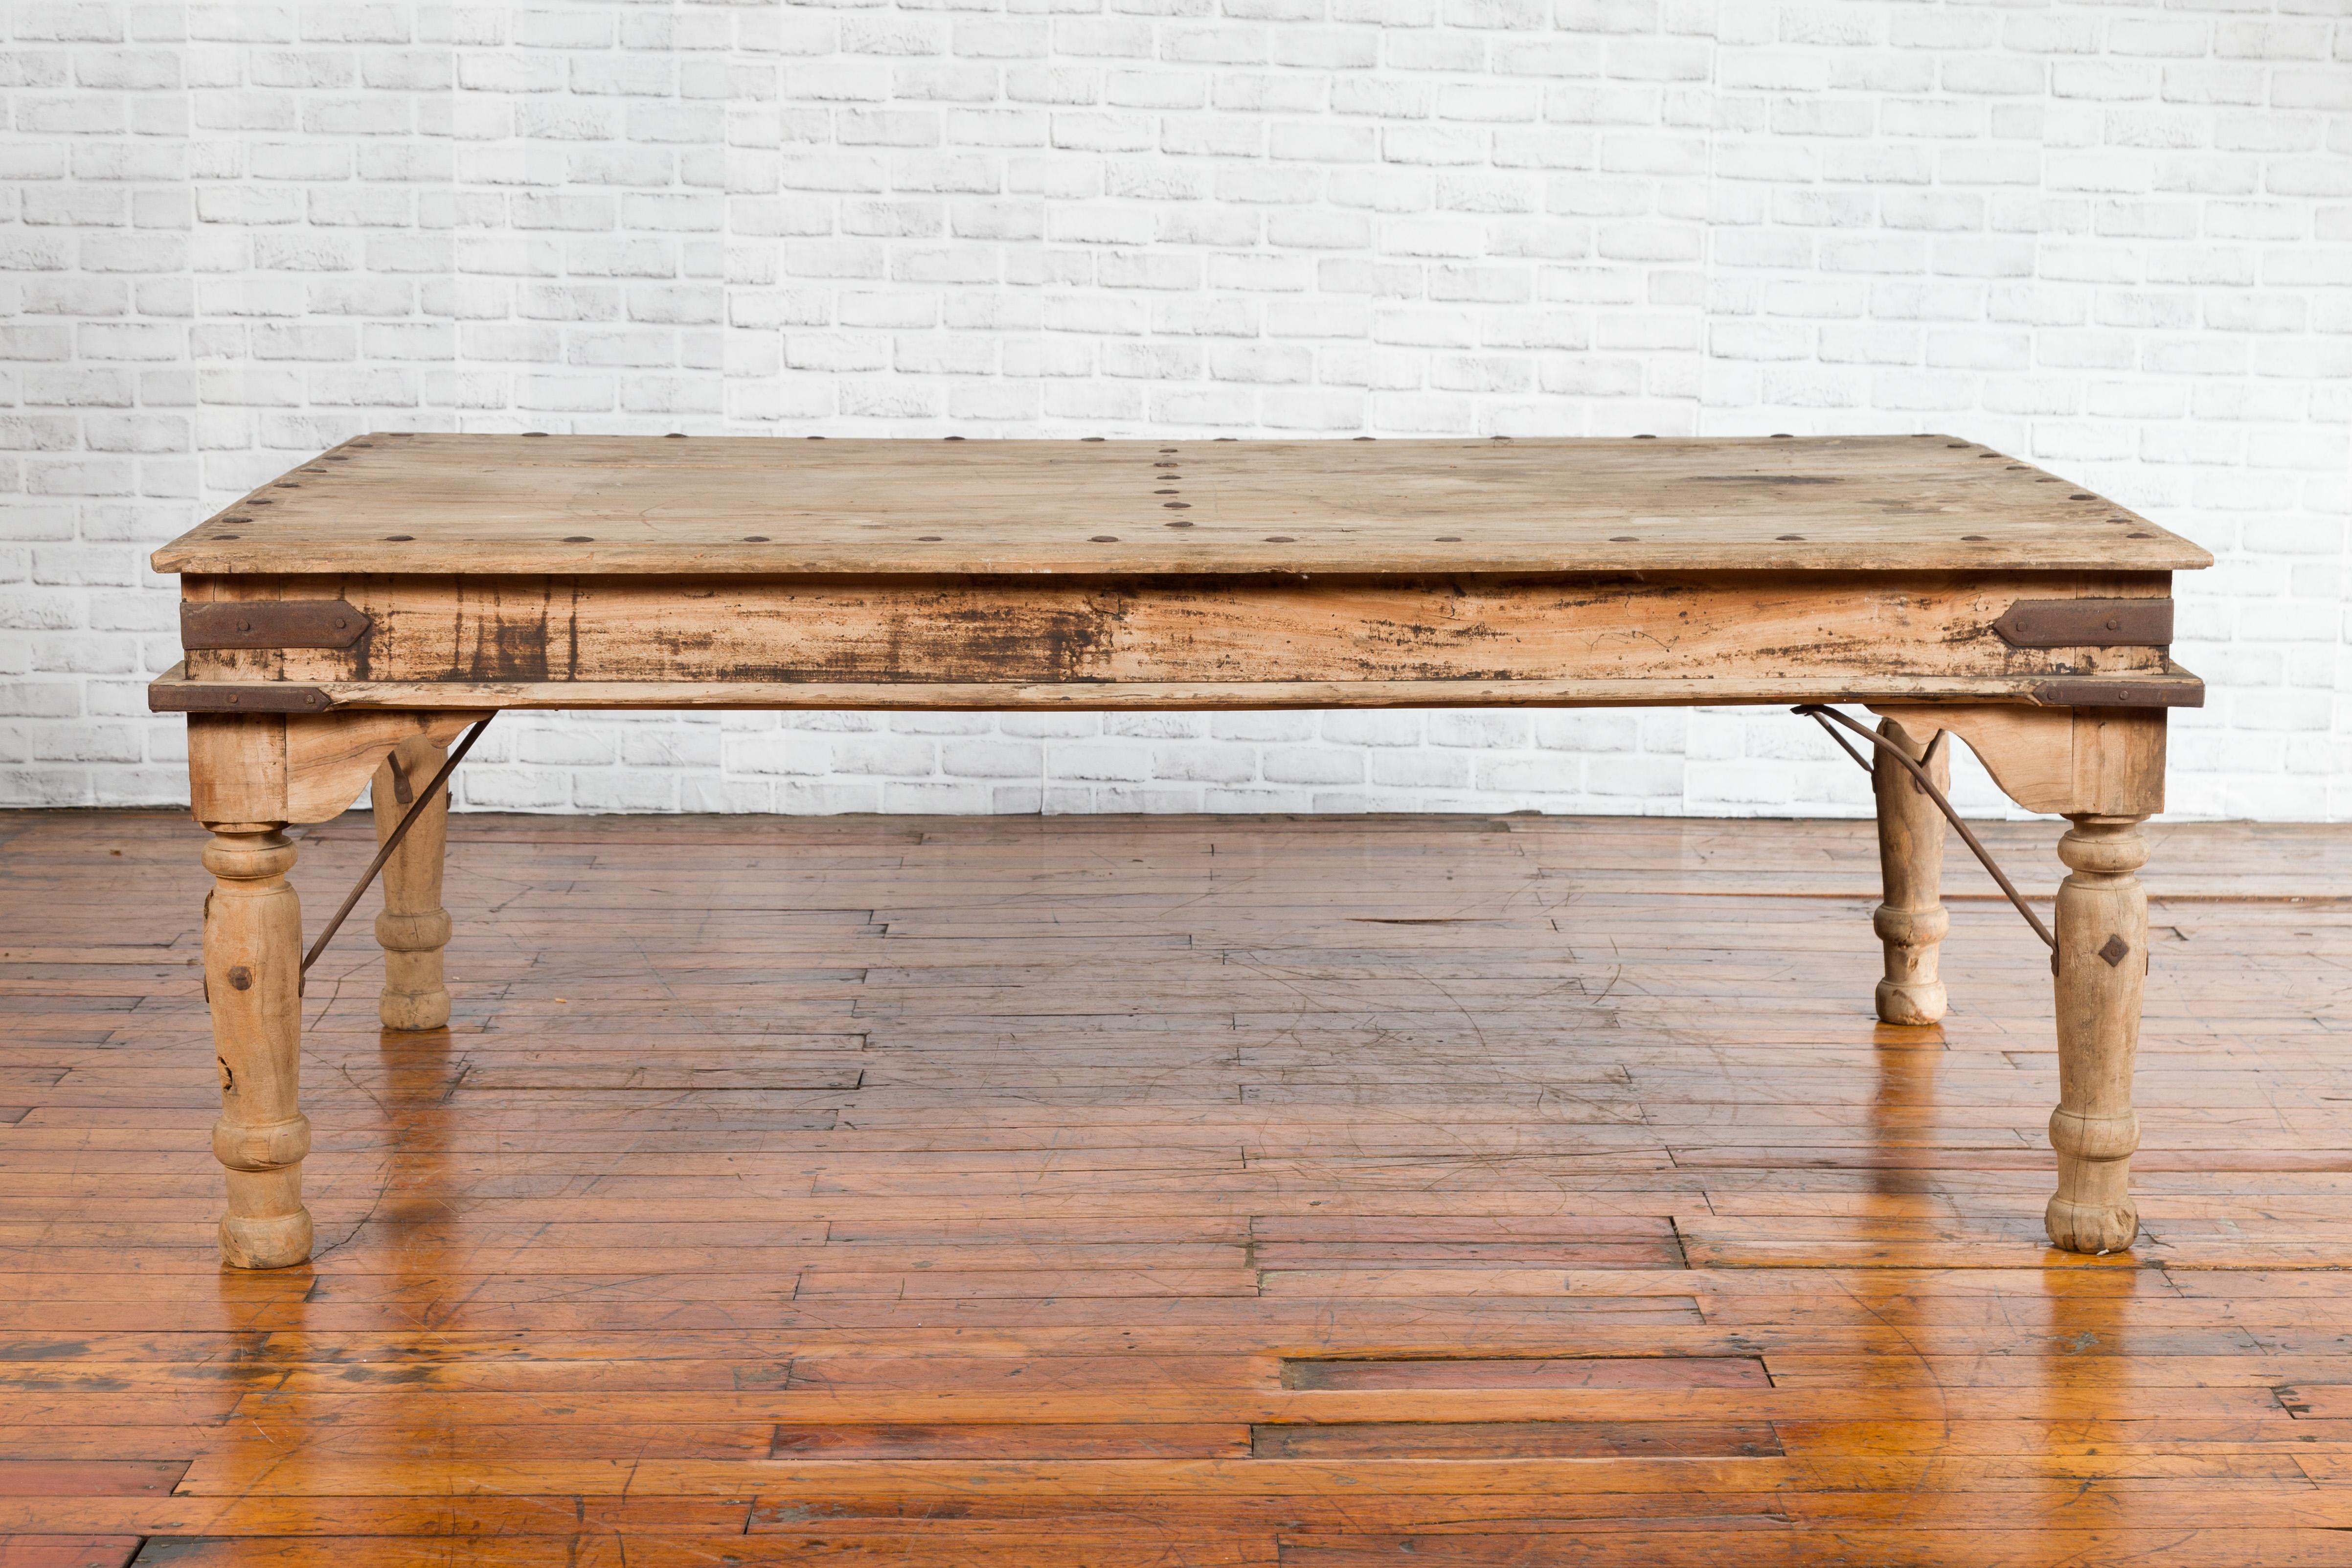 An antique rustic Indian low table from the early 20th century, with iron details. Created in India during the early years of the 20th century, this low table features a rectangular planked top with iron studs, sitting above a simple apron accented